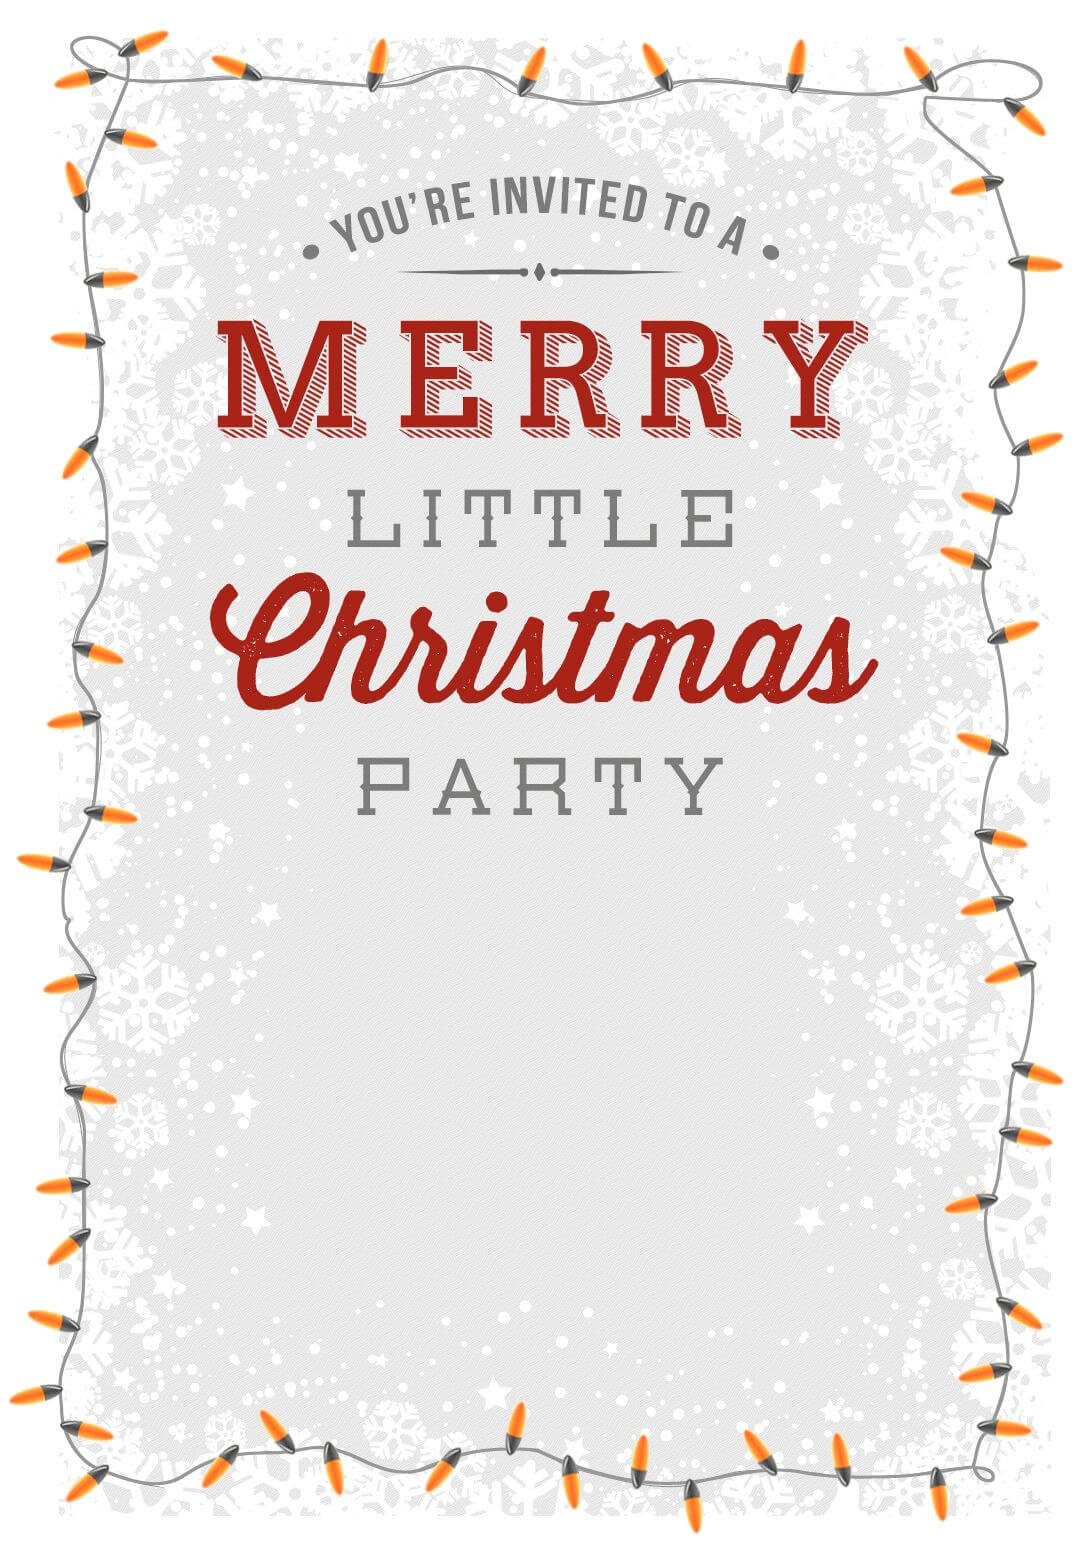 A Merry Little Party – Free Printable Christmas Invitation With Free Christmas Invitation Templates For Word